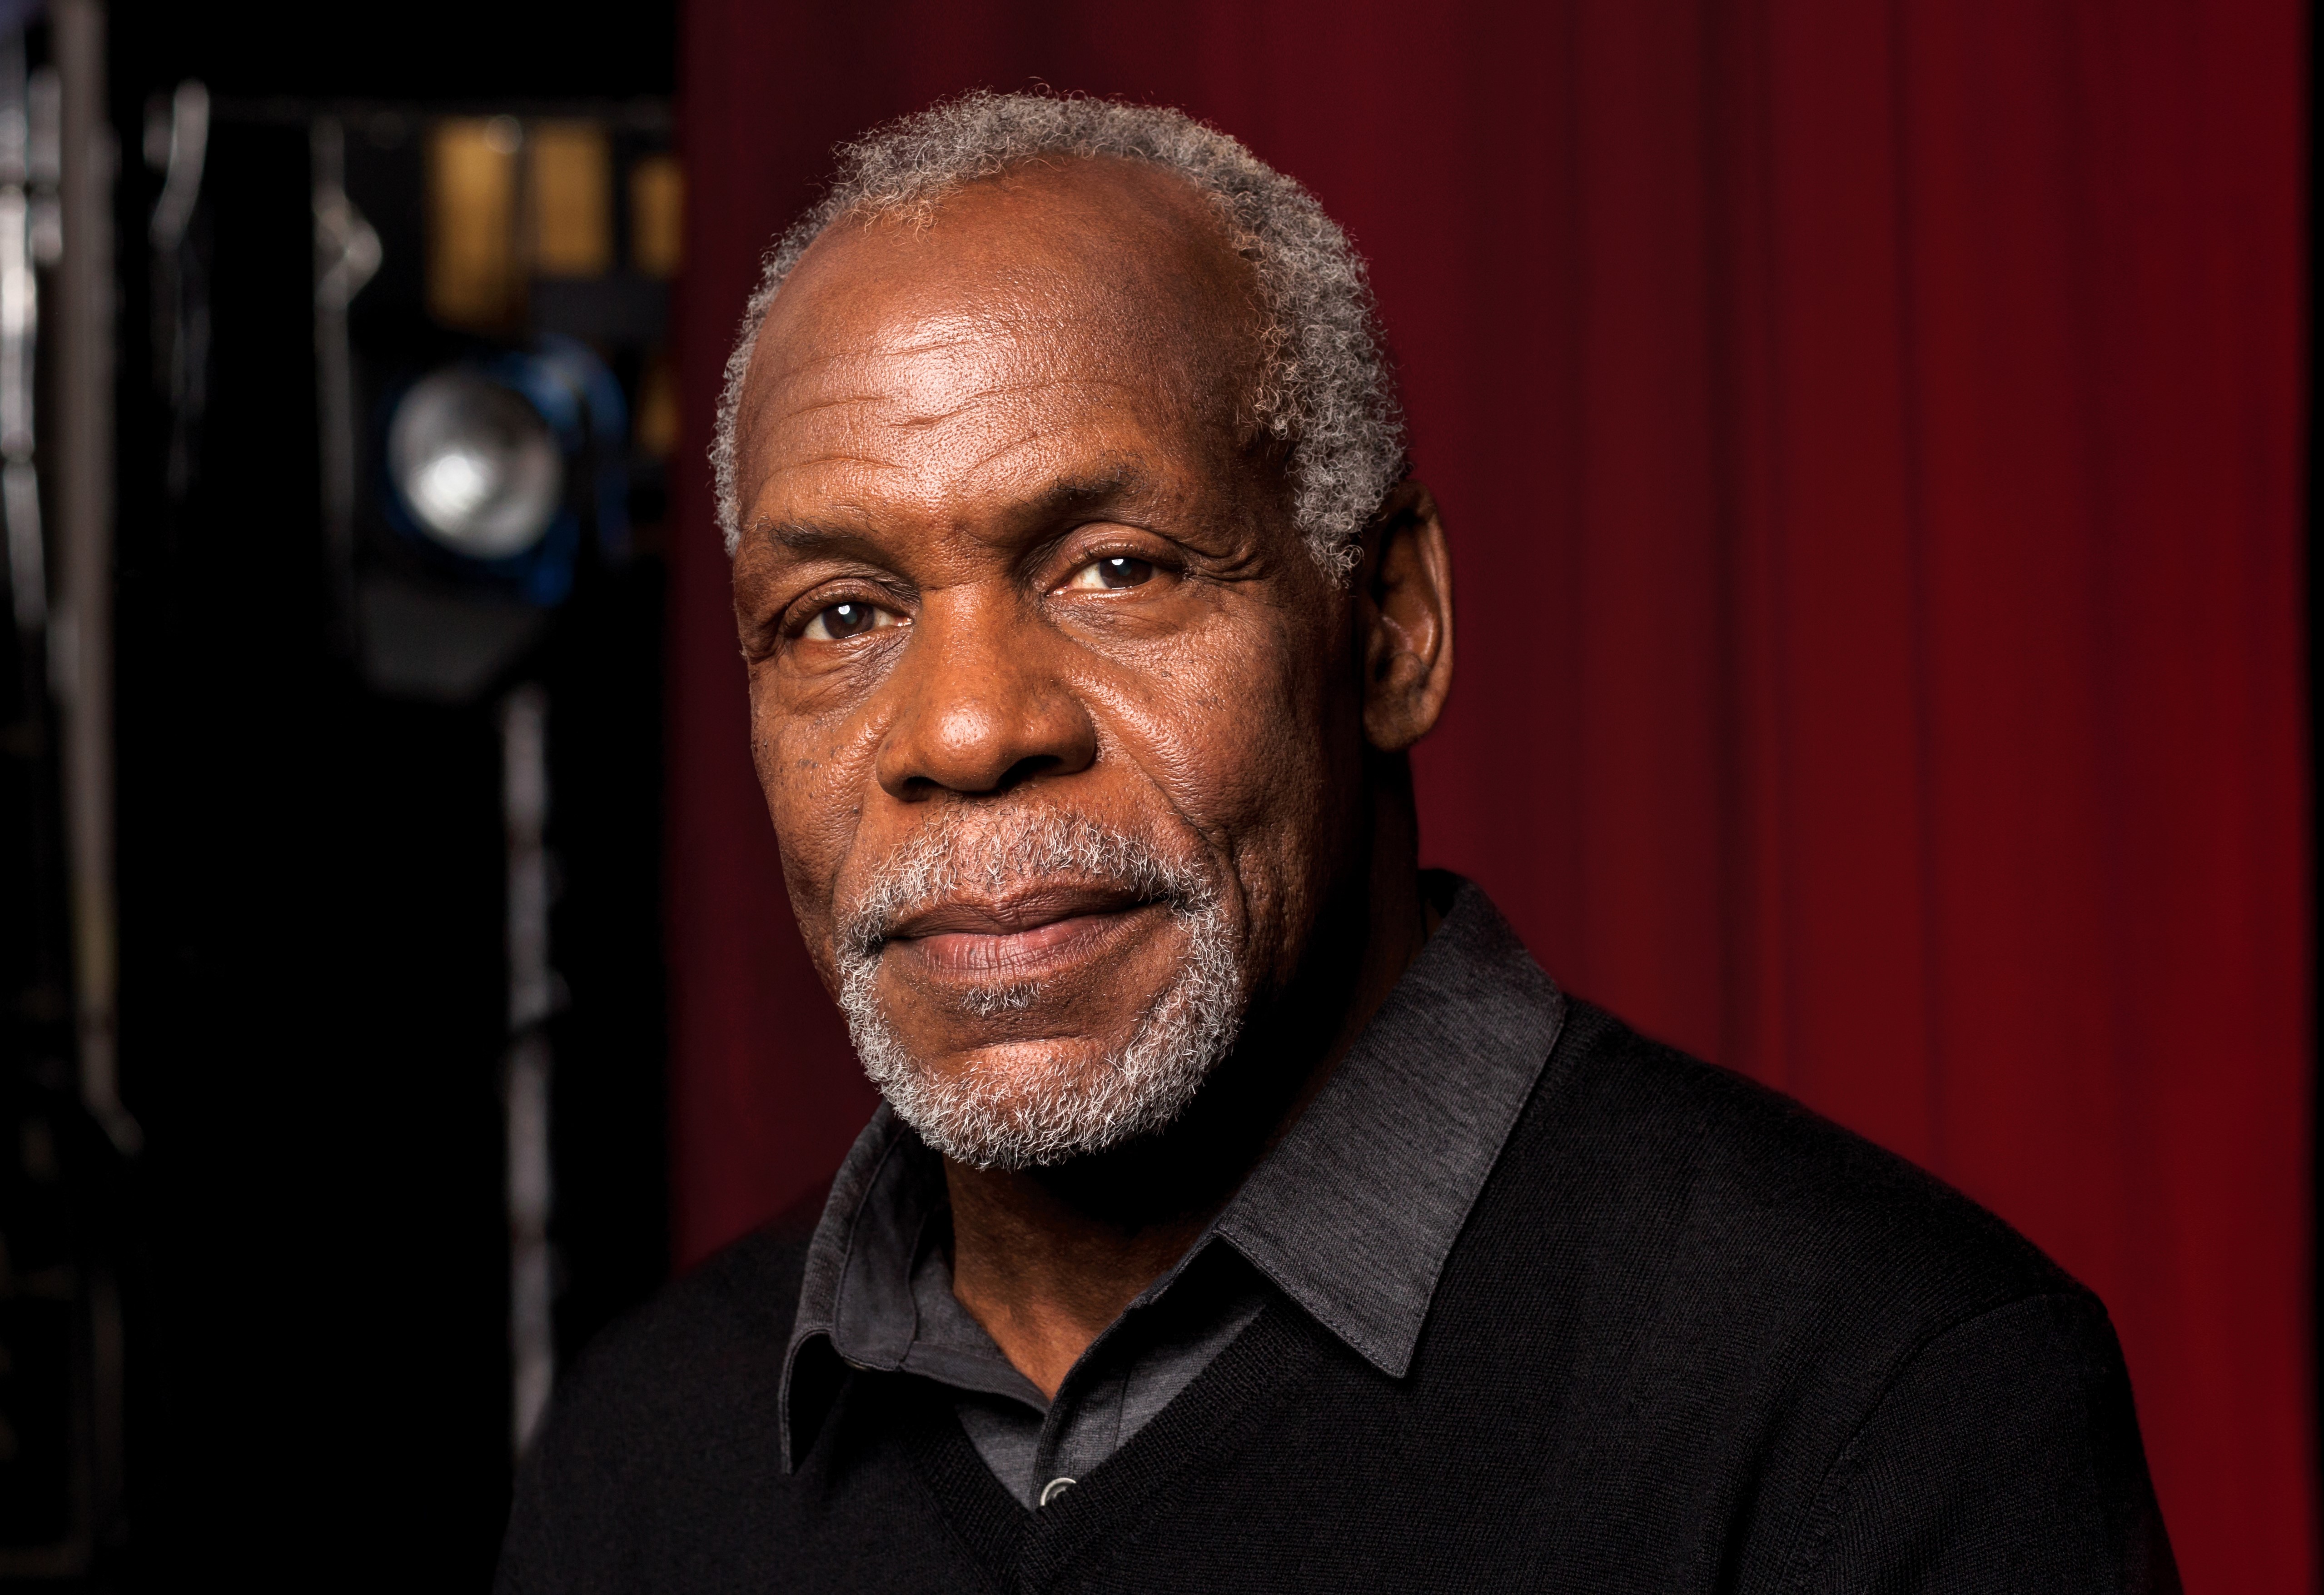 Hollywood Actor Danny Glover To Give Commencement Address To 2018 UVI Grads